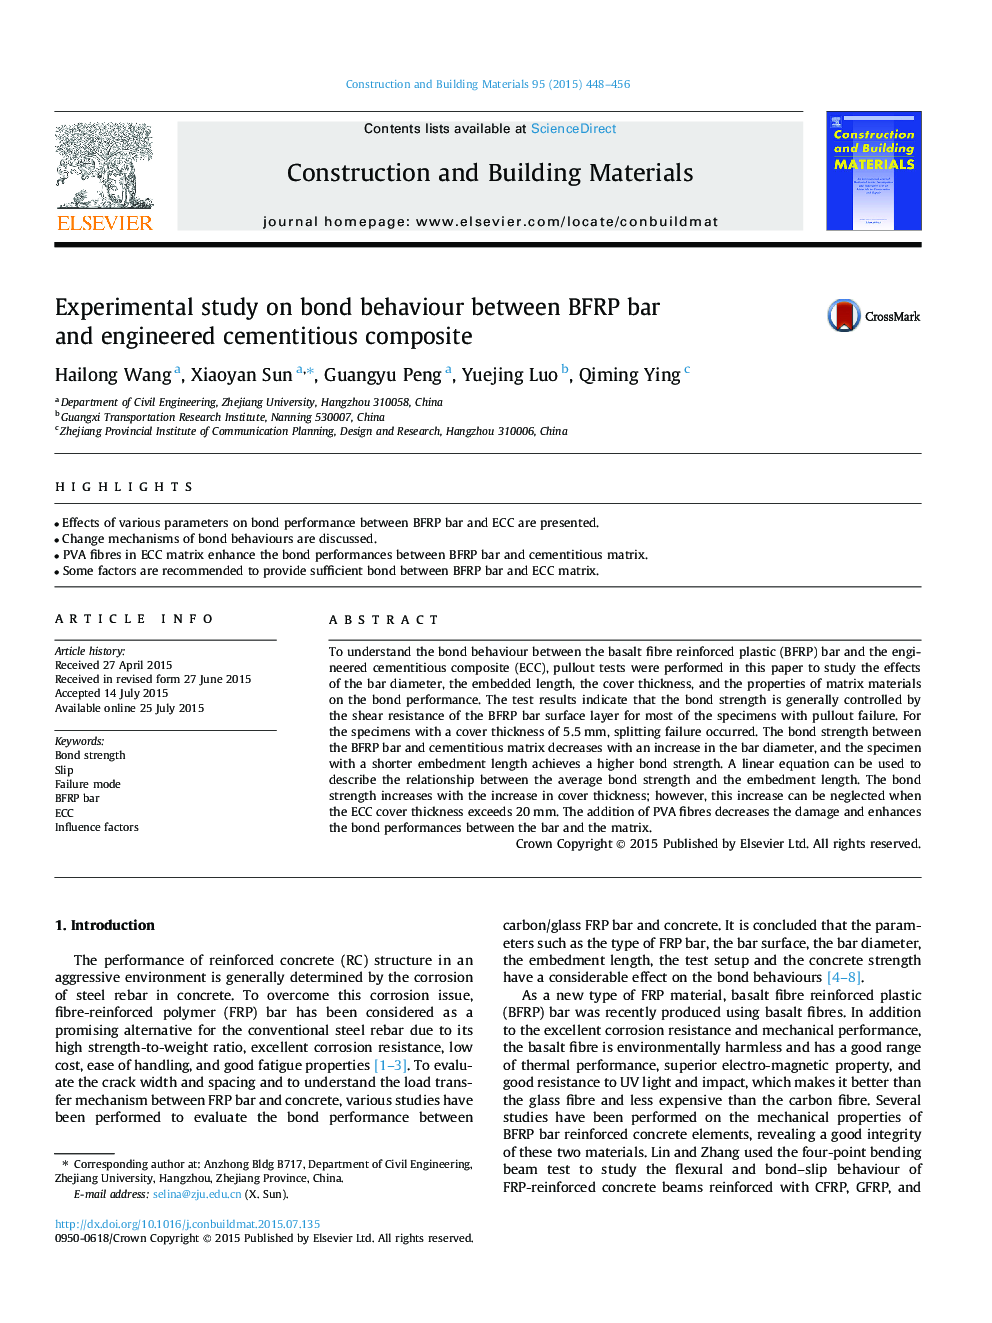 Experimental study on bond behaviour between BFRP bar and engineered cementitious composite